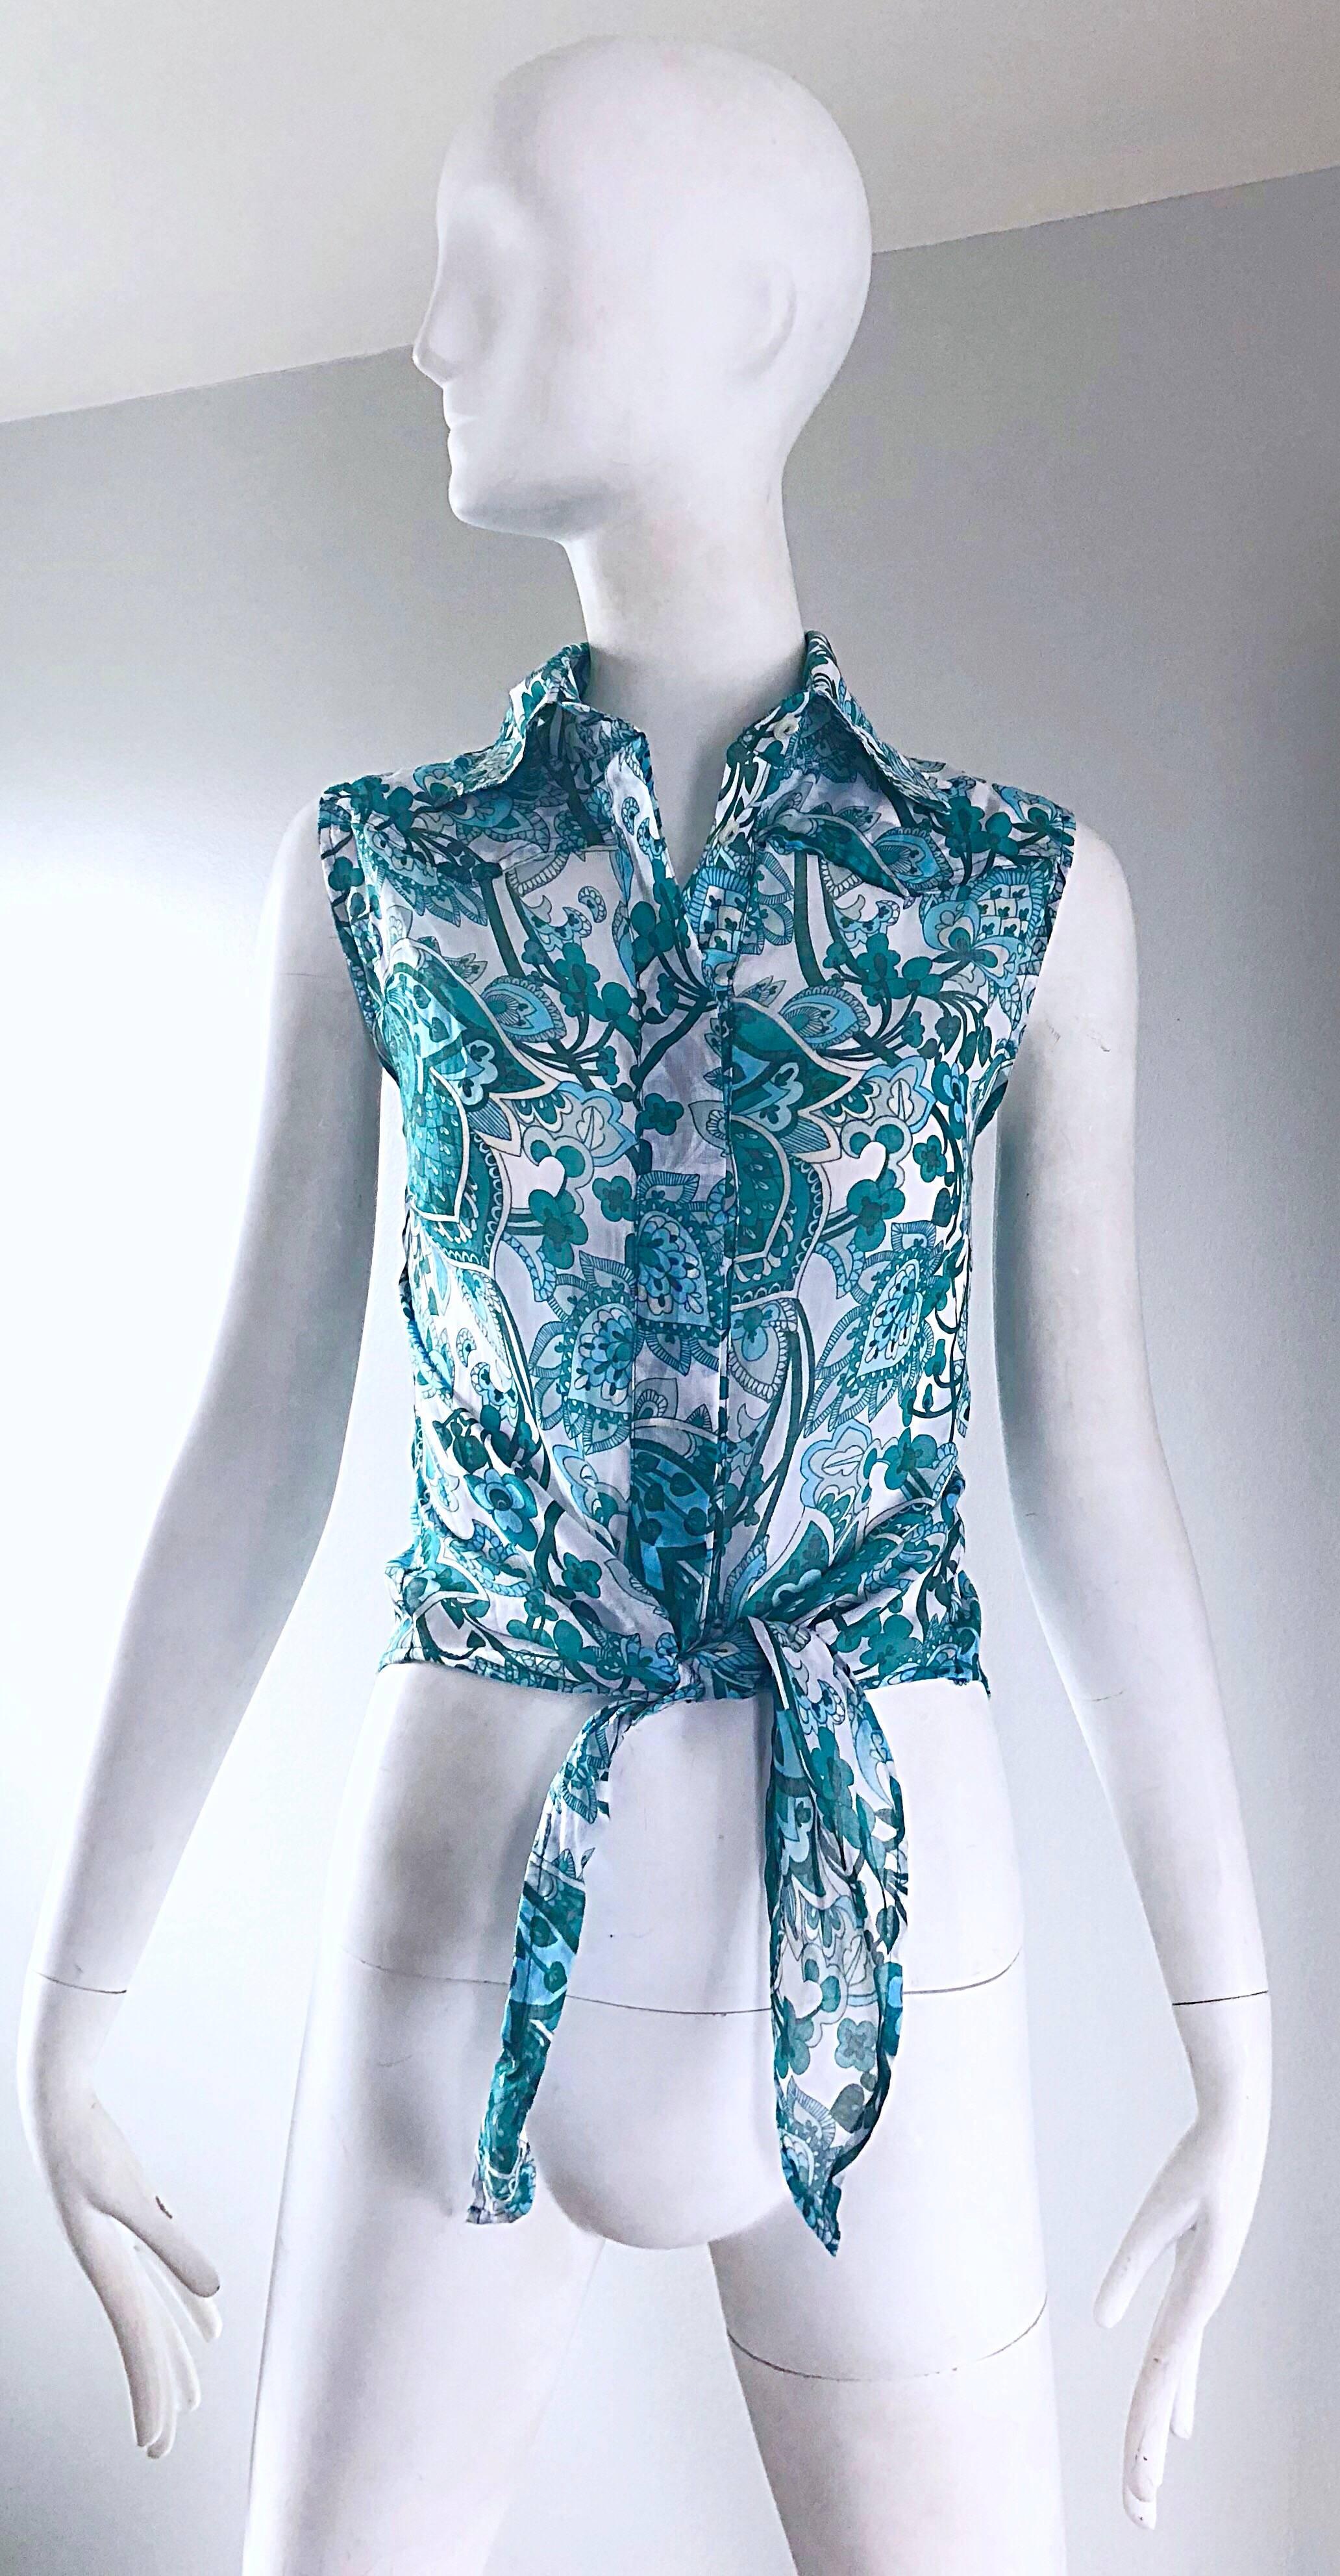 Chic late 1990s PATRIZIA PEPE turquoise blue, teal and white lightweight cotton cropped blouse! Features a vibrant paisley print. Hidden buttons up the front, and ties in the front. Great with jeans (especially white), shorts, or a skirt. In great